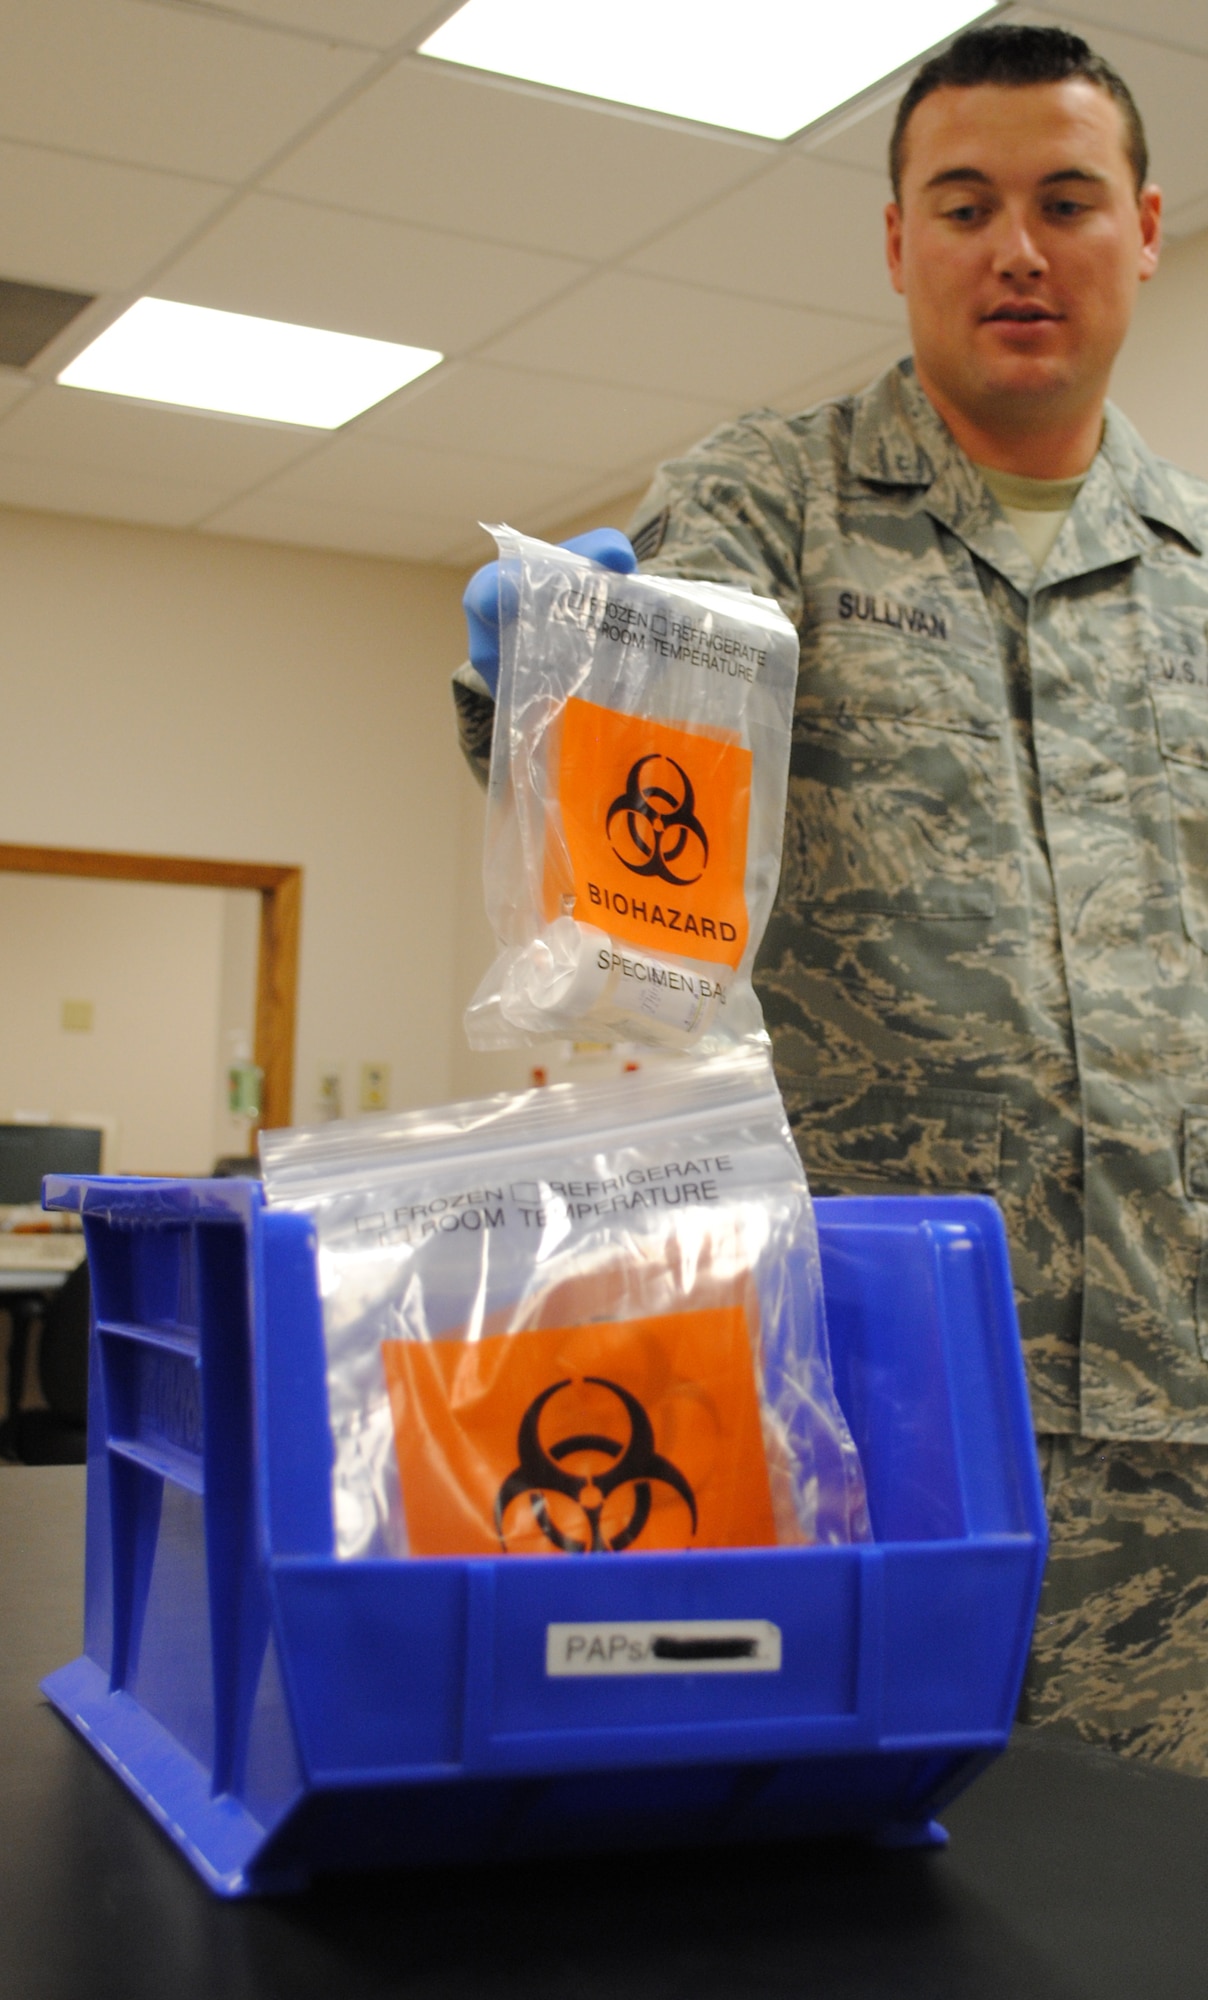 Staff Sgt. Thomas C. Sullivan Jr., 319th Medical Support Squadron laboratory technician, carefully places two more medical samples into a bin for shipment May 22, 2013, at the medical laboratory on Grand Forks Air Force Base, N.D. The base medical laboratory complies with federal regulations and laws for medical sample handling by using plastic bags with warning labels such as the biohazard symbol. (U.S. Air Force photo/Staff Sgt. Luis Loza Gutierrez)